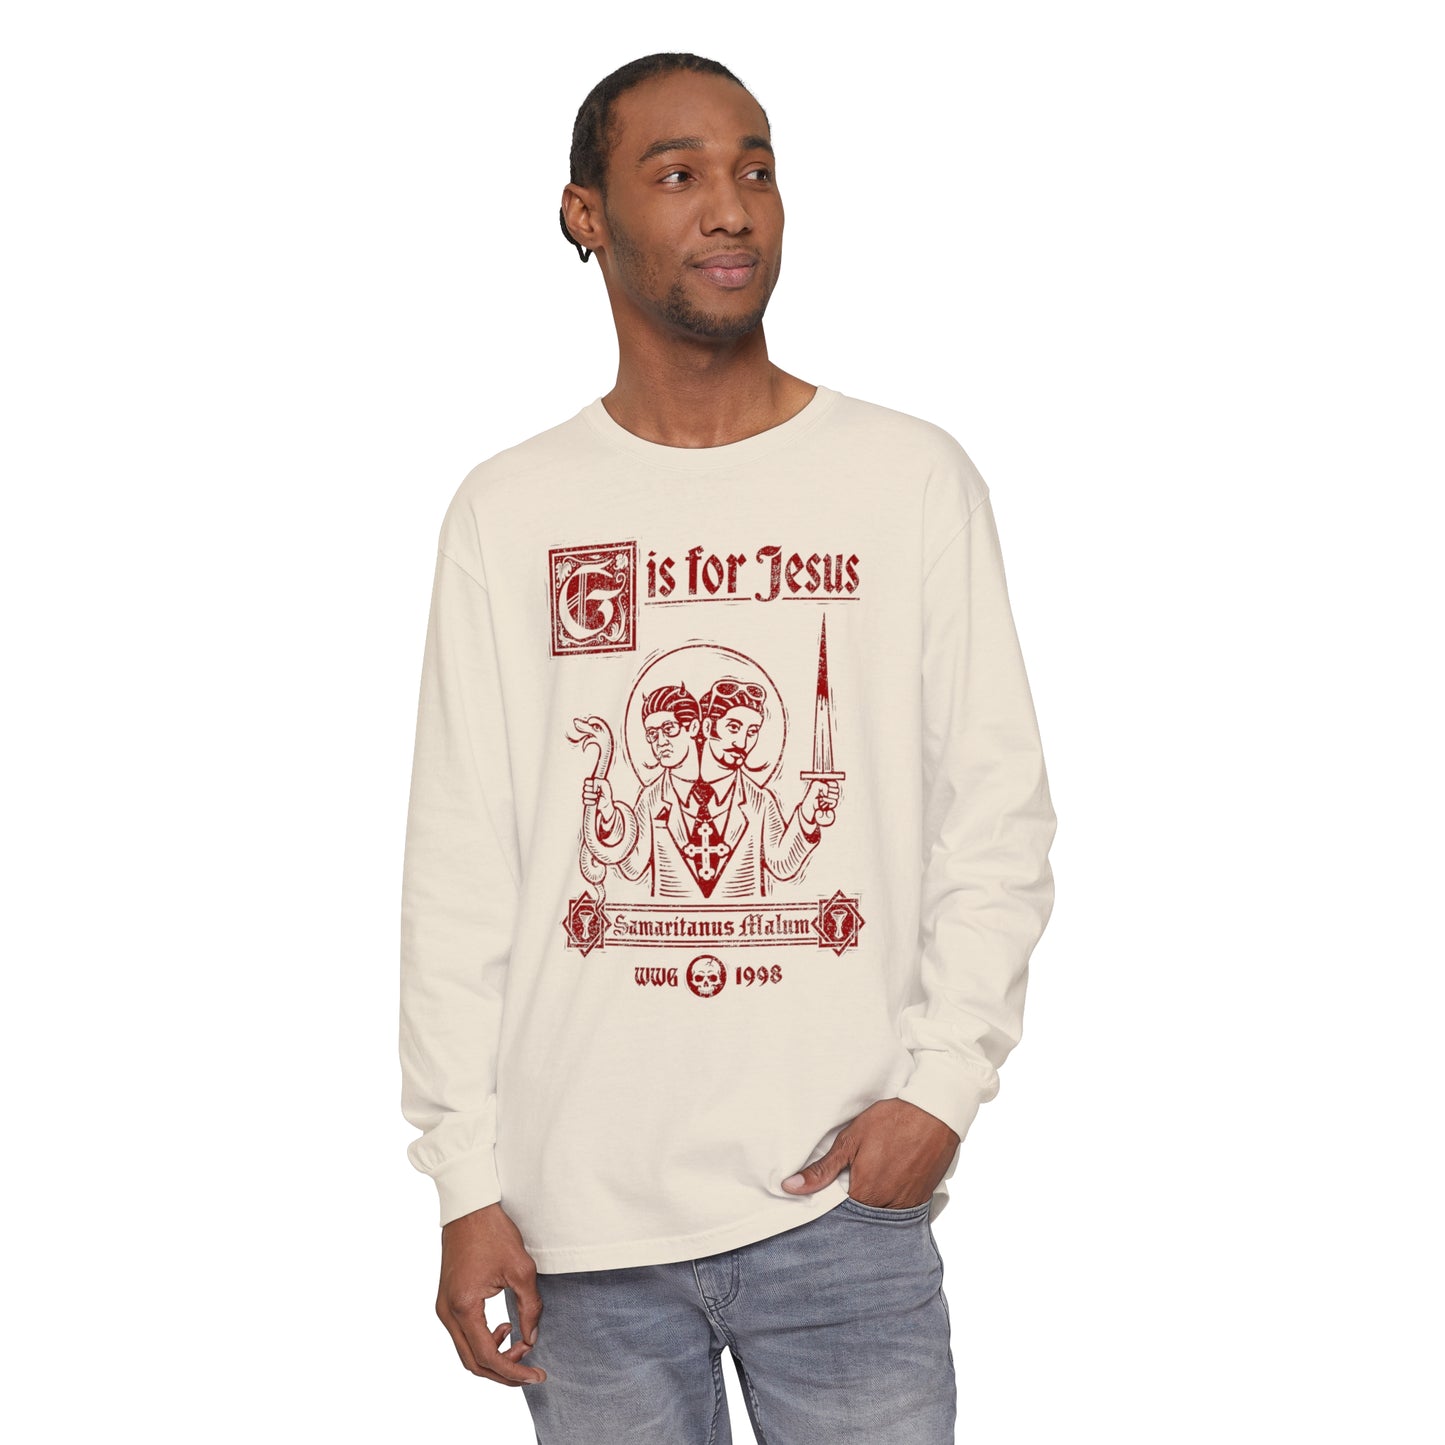 G is for Jesus Long-Sleeve T-Shirt (Red Print)